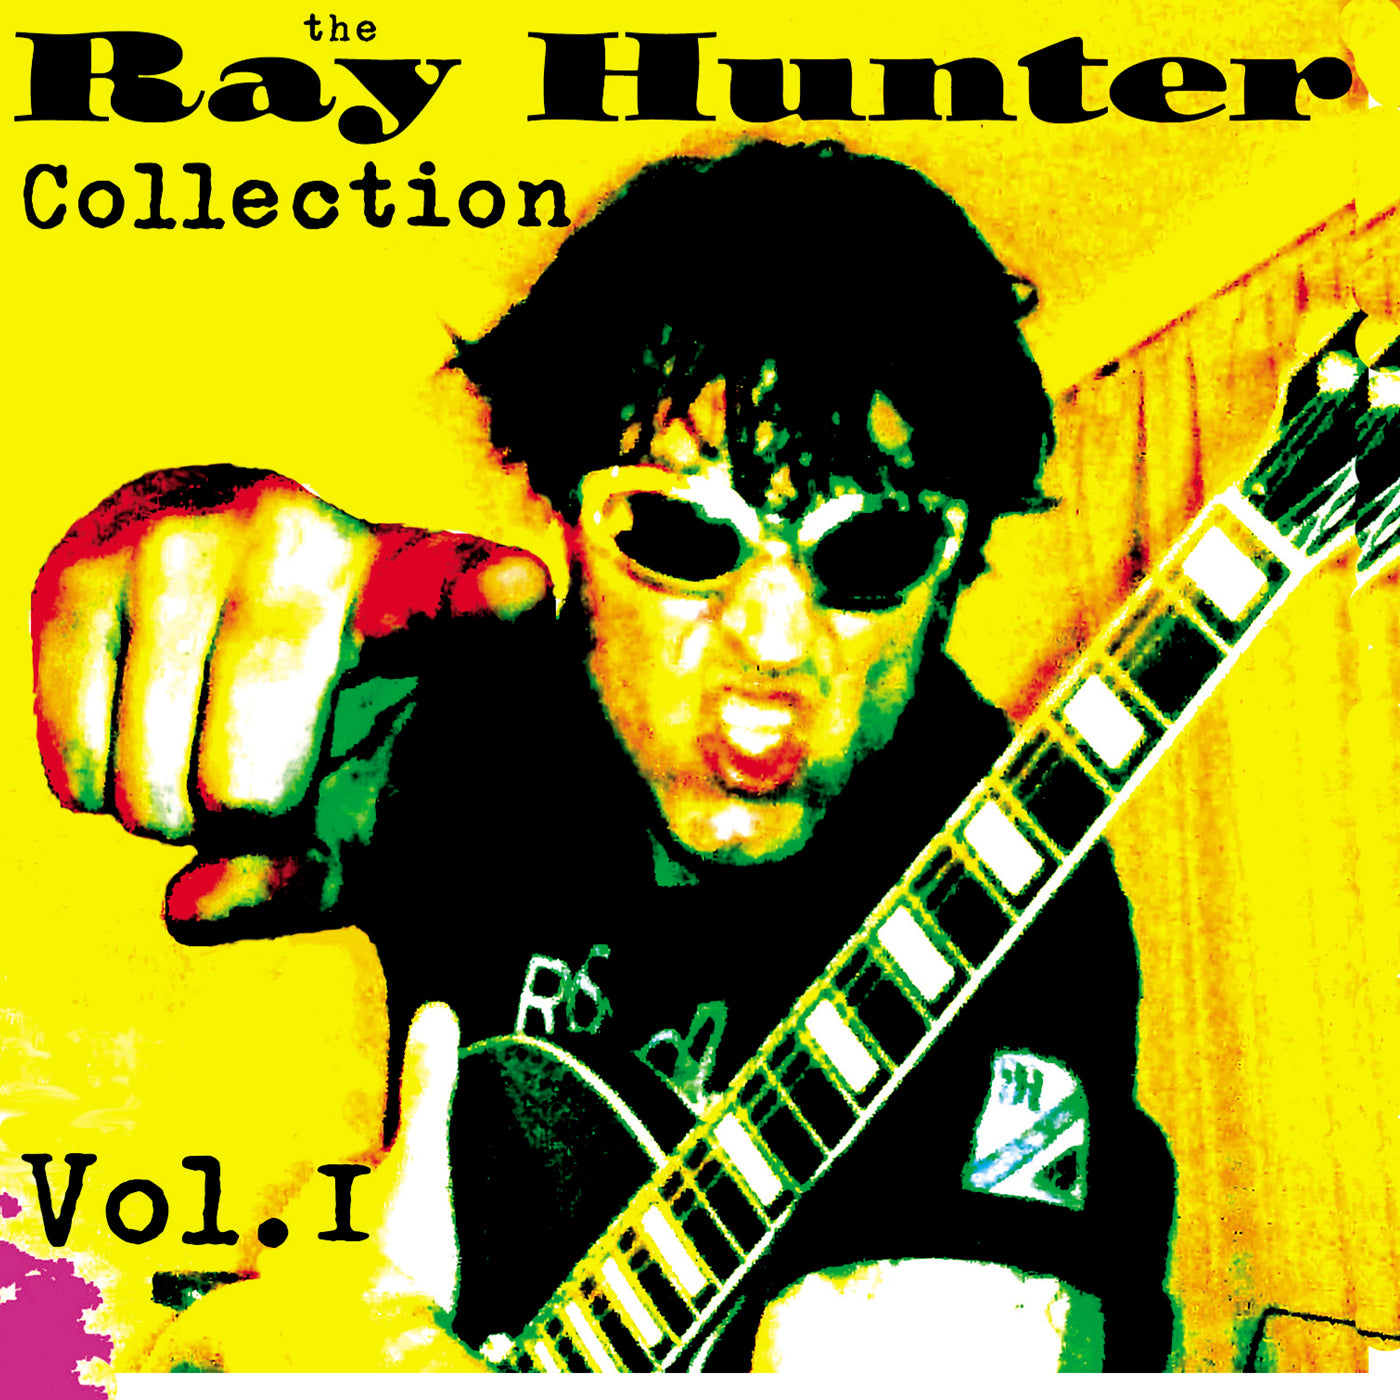 Ray Hunter - The Ray Hunter Collection Vol. 1